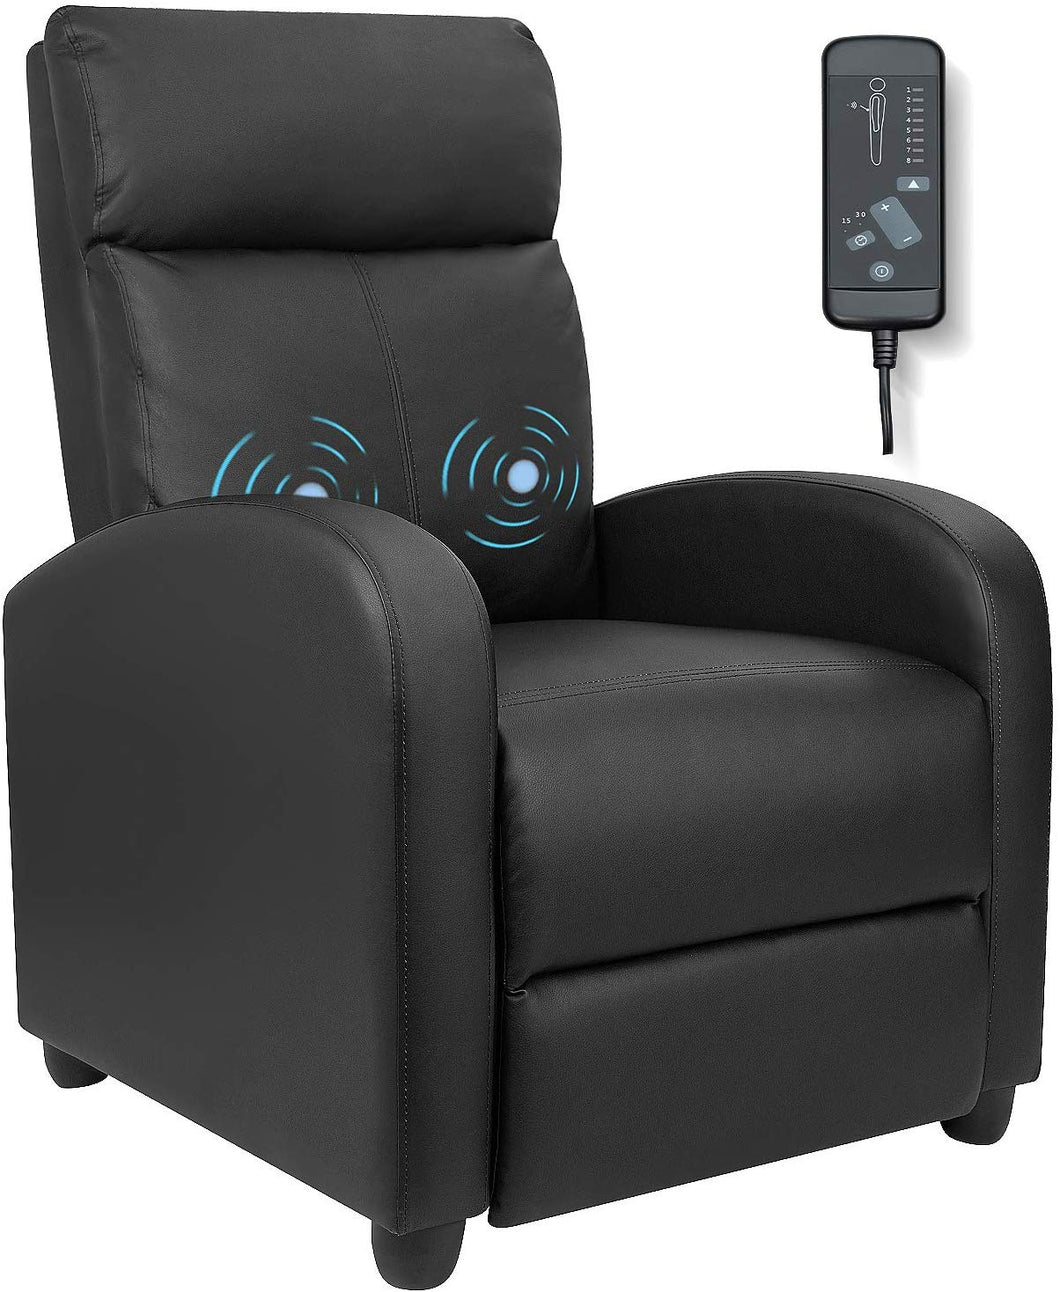 Recliner Chair with Massage Home Theater Seating PU Leather Modern Living Room Chair Padded Cushion Reclining Sofa (Black)